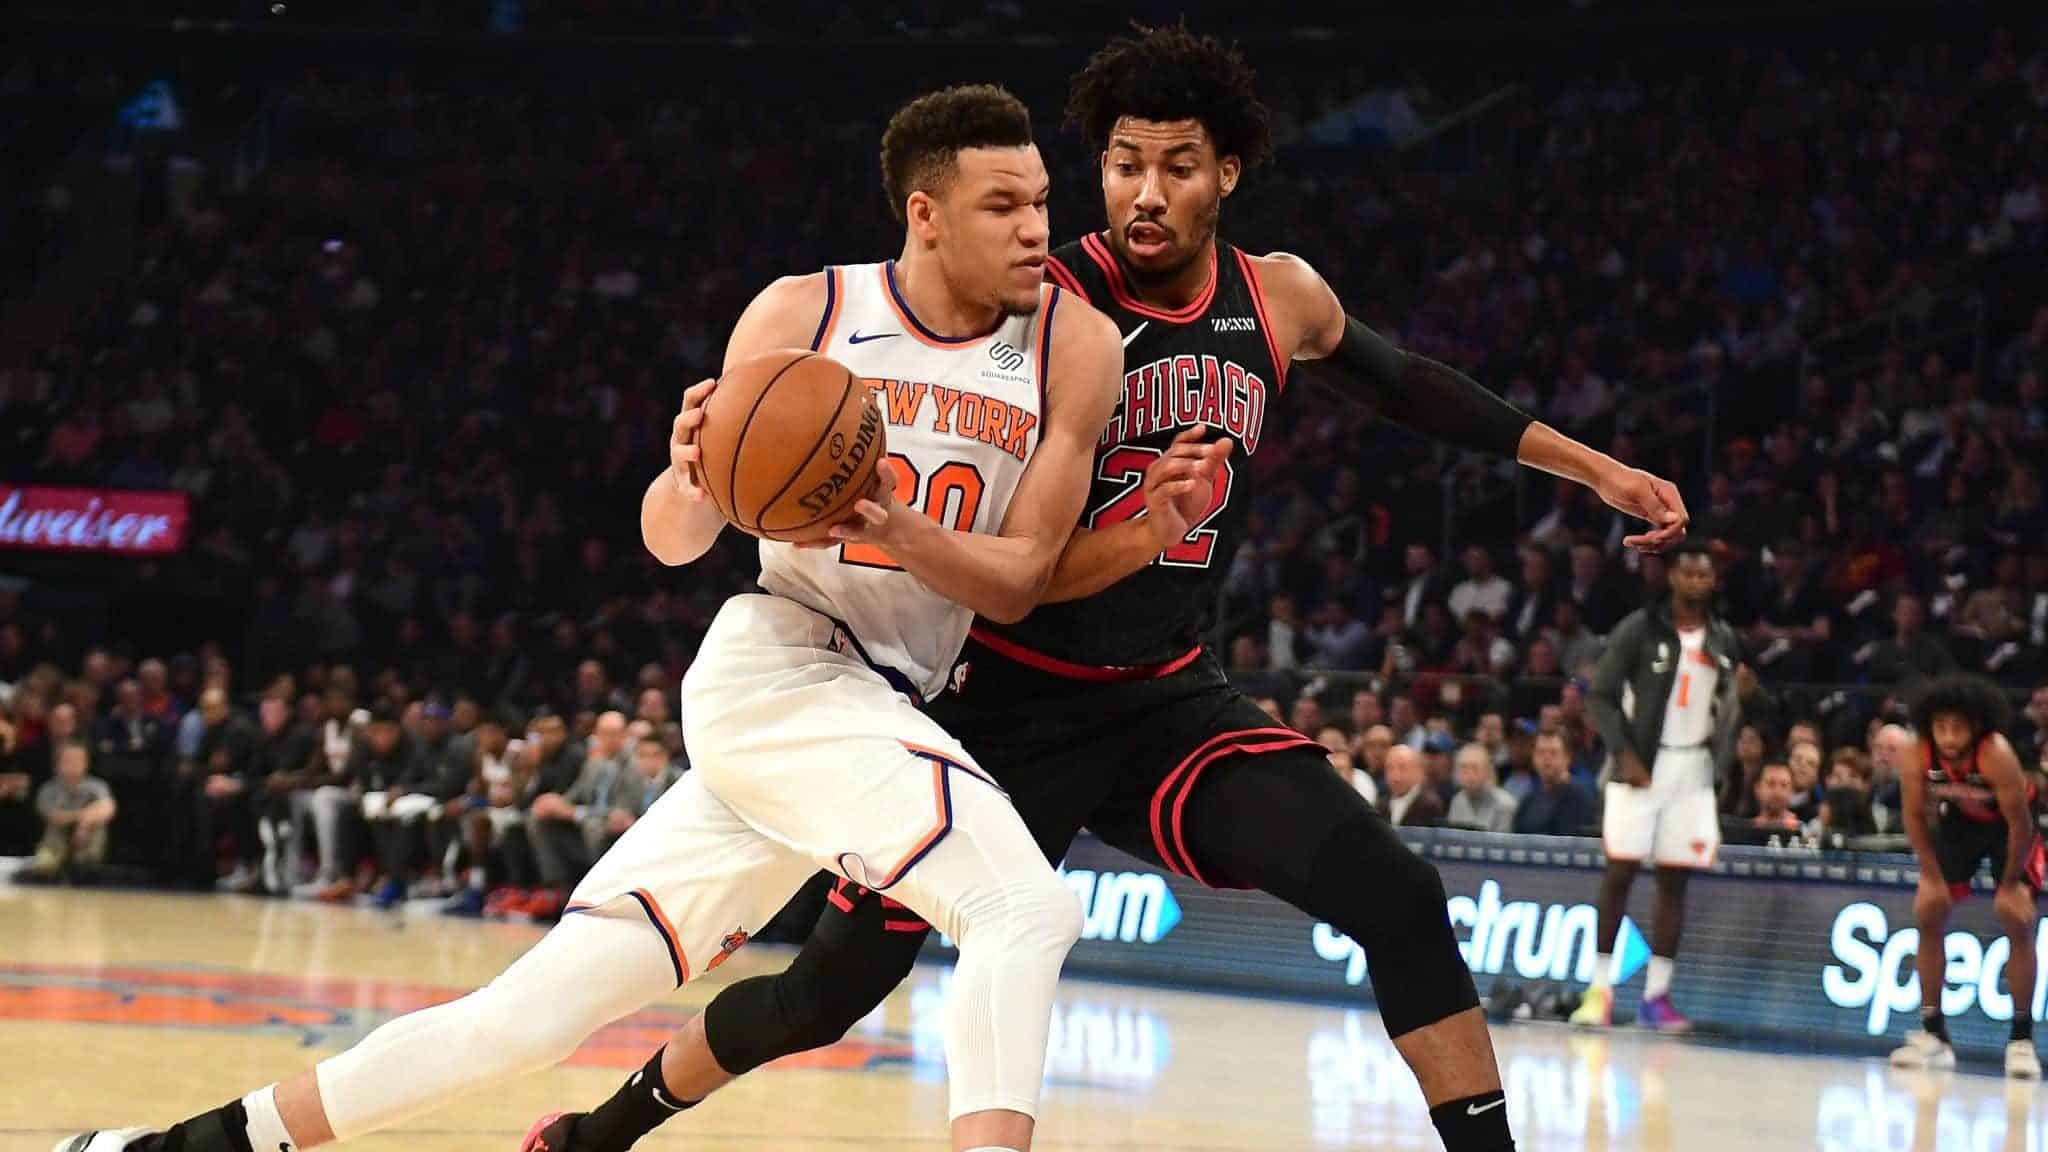 NEW YORK, NEW YORK - OCTOBER 28: Kevin Knox II #20 of the New York Knicks drives against Otto Porter Jr. #22 of the Chicago Bulls in the first half at Madison Square Garden on October 28, 2019 in New York City. NOTE TO USER: User expressly acknowledges and agrees that, by downloading and or using this Photograph, user is consenting to the terms and conditions of the Getty Images License Agreement.